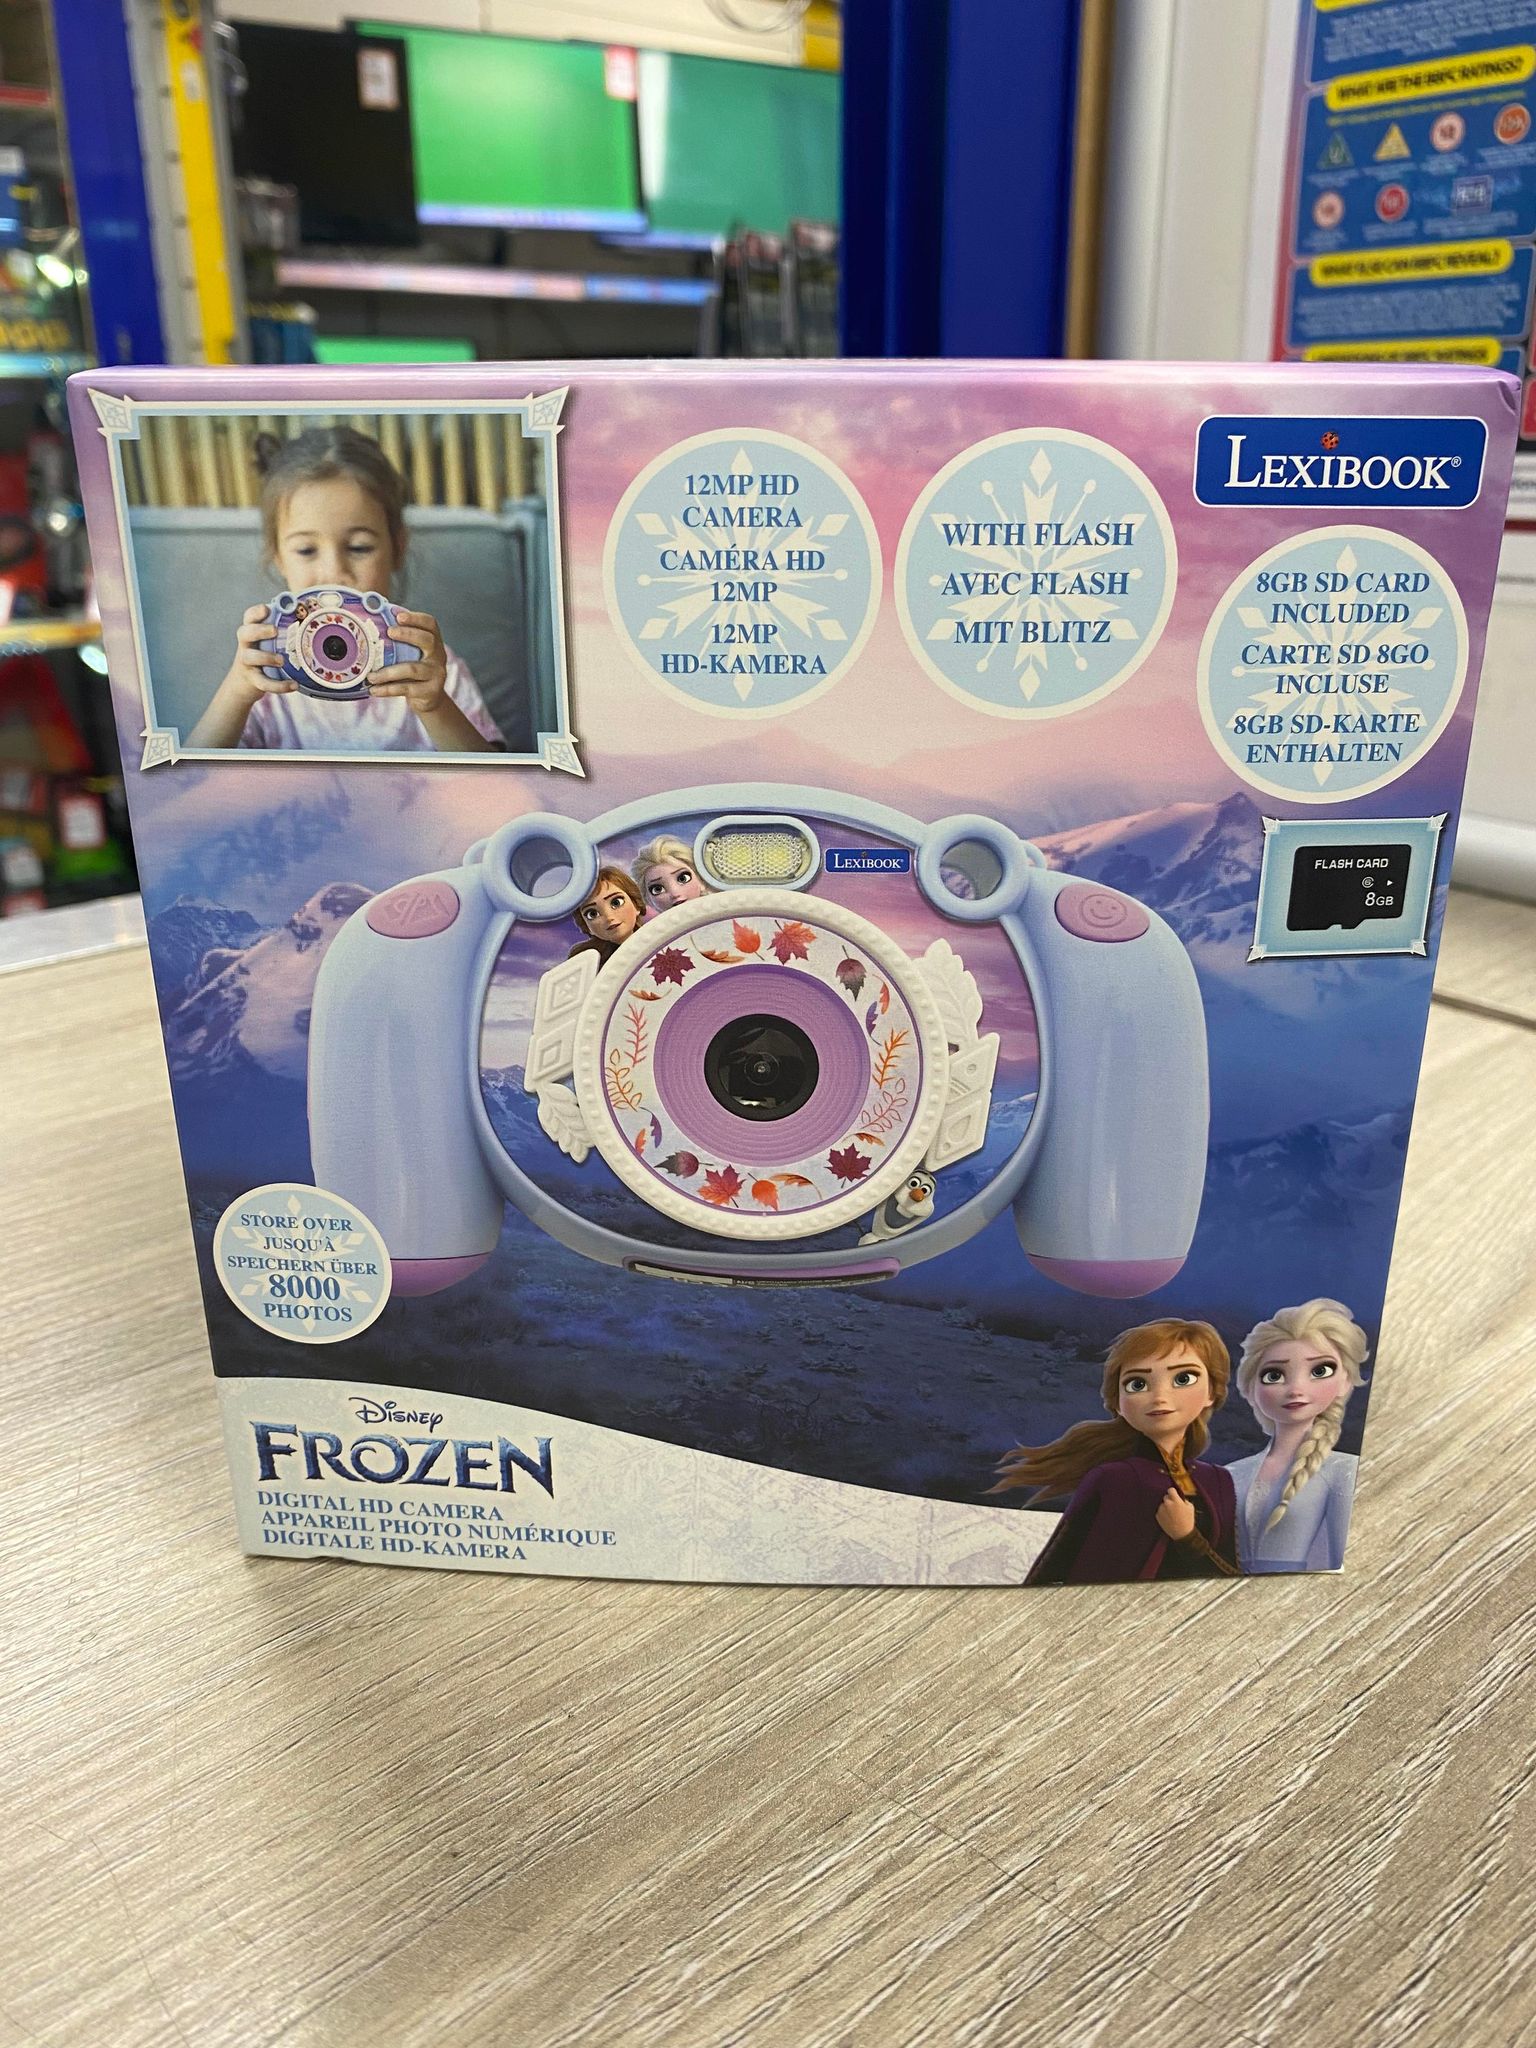 Lexibook Frozen Digital Camera With Photo And Video Function - Brand